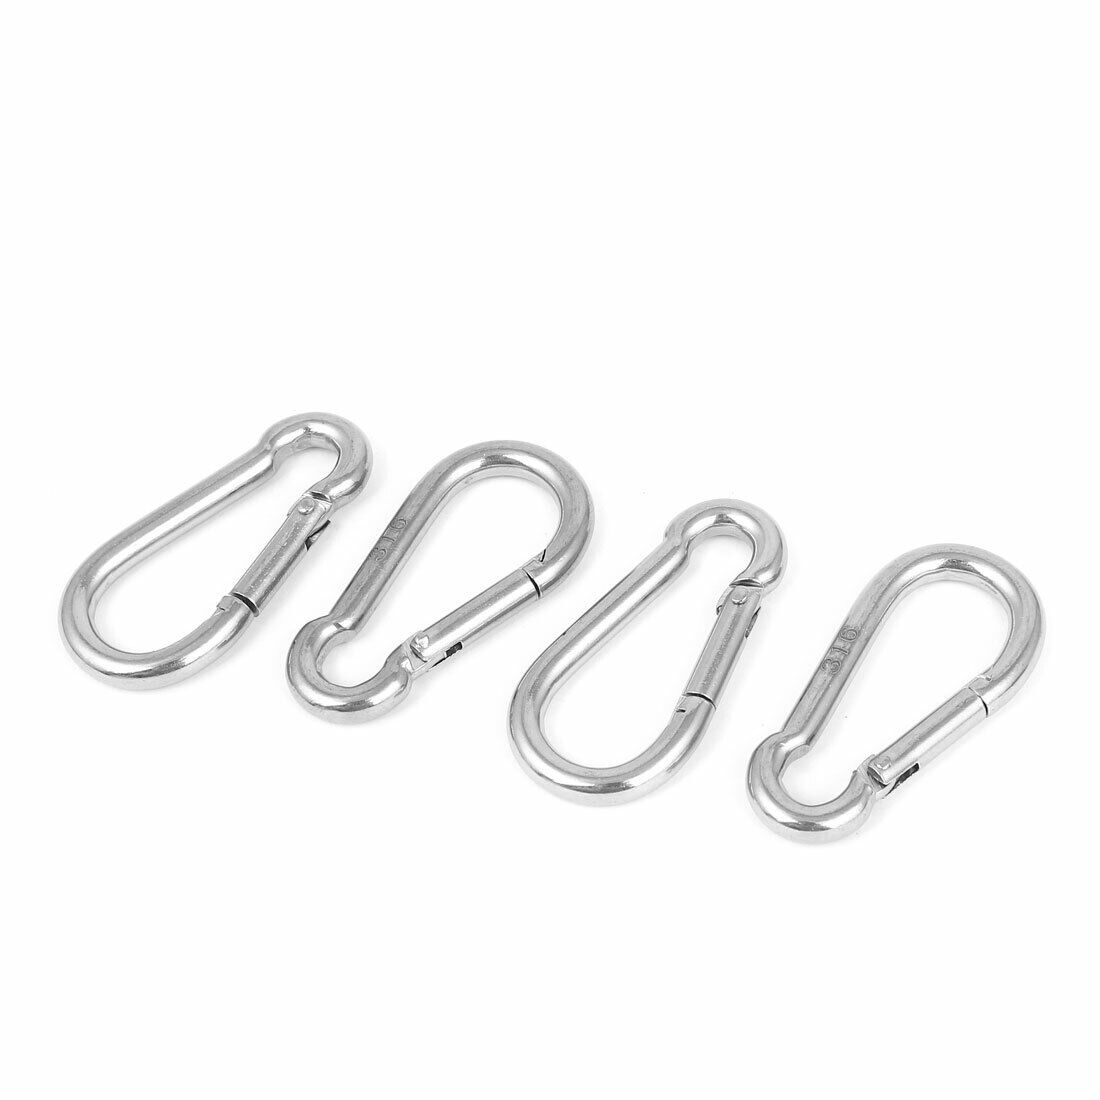 50mm x 25mm x 5mm 316 Stainless Steel Spring Carabiner Snap Hooks 4PCS